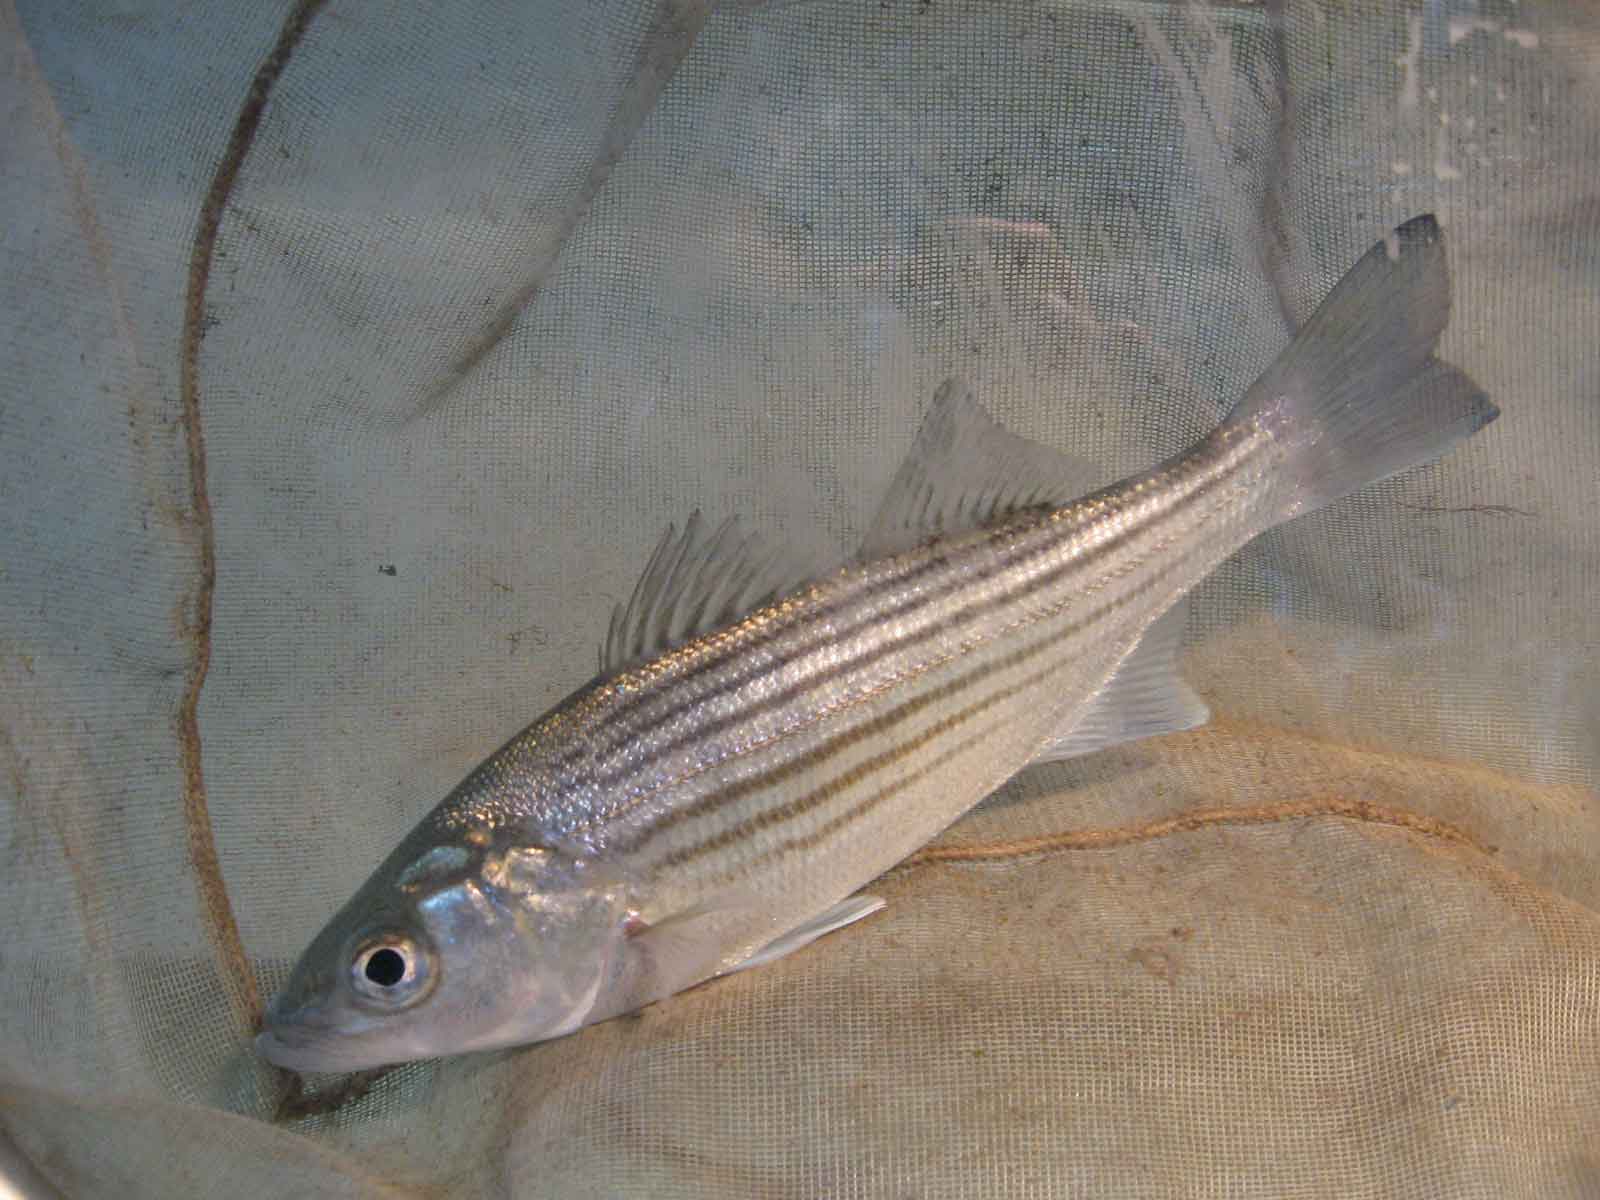 A stripped bass with horizontal lines swims down the tank